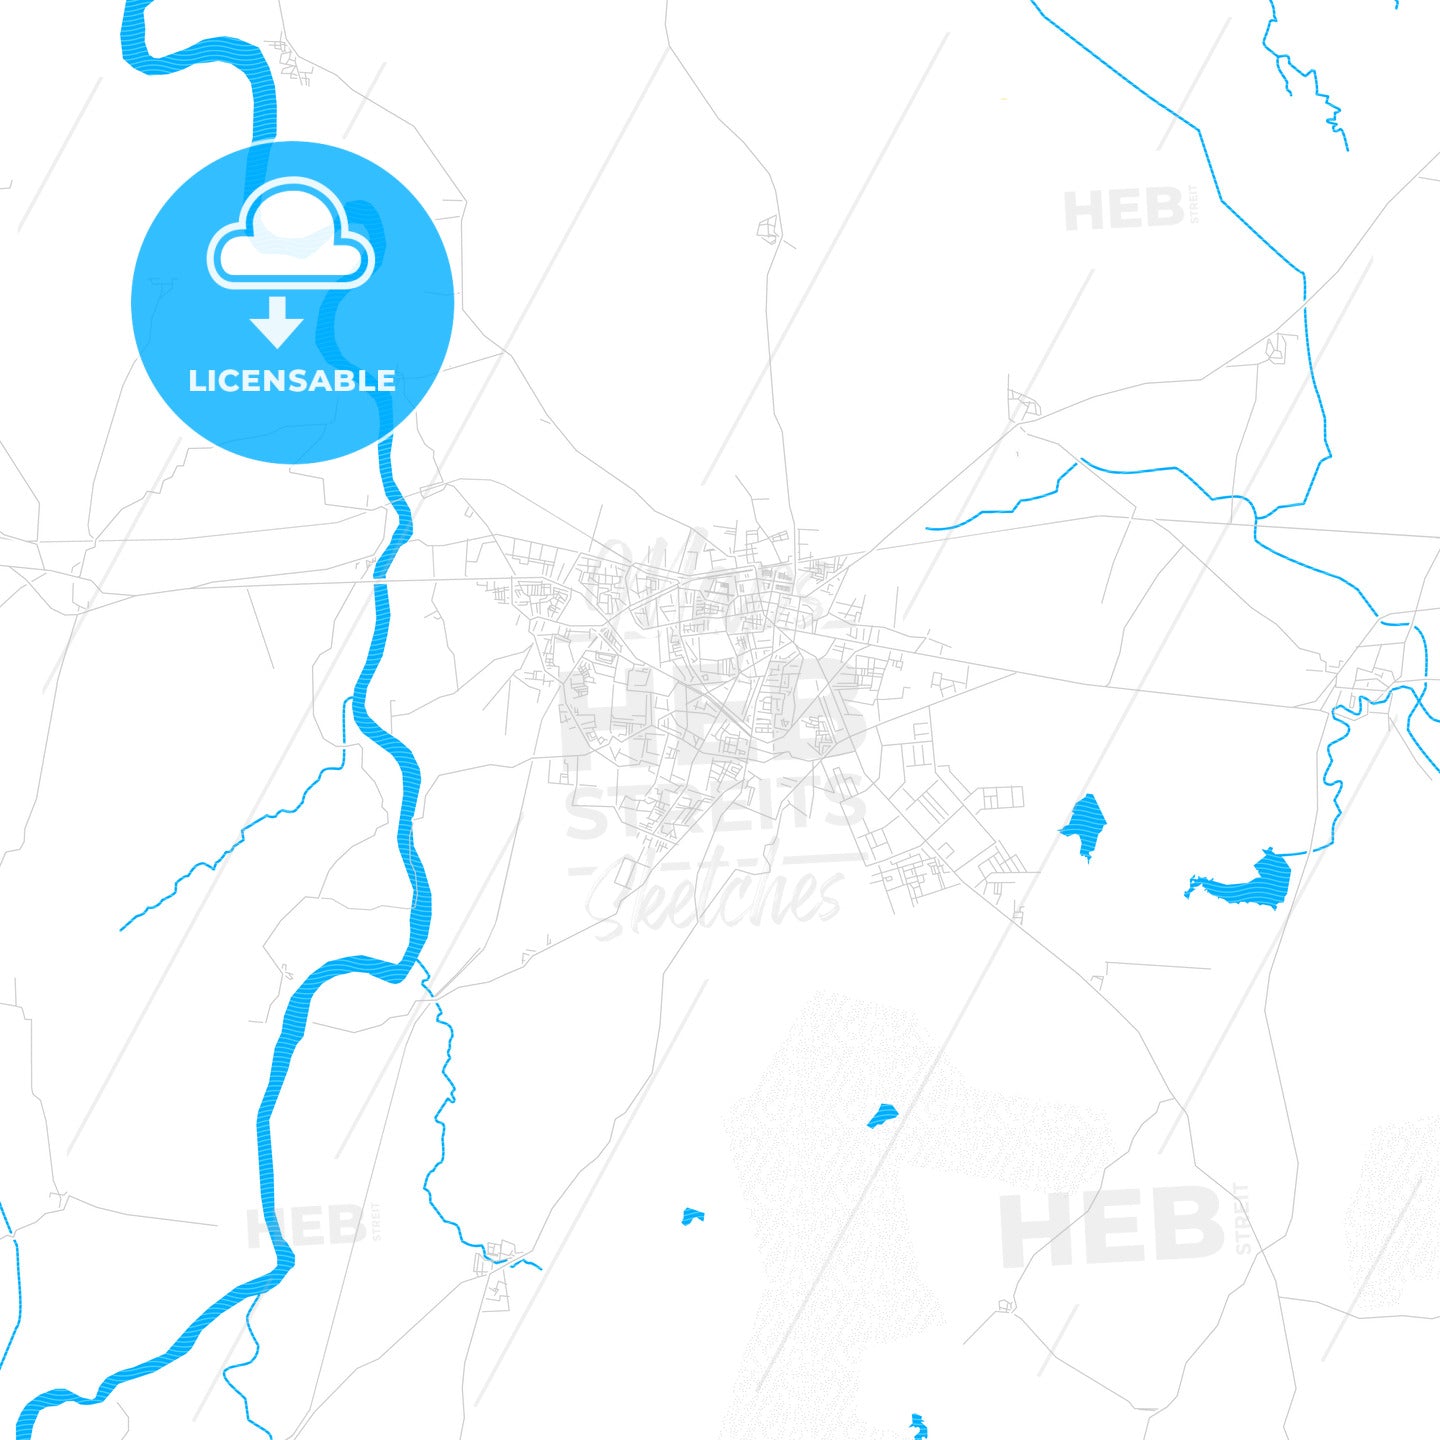 Jalgaon, India PDF vector map with water in focus